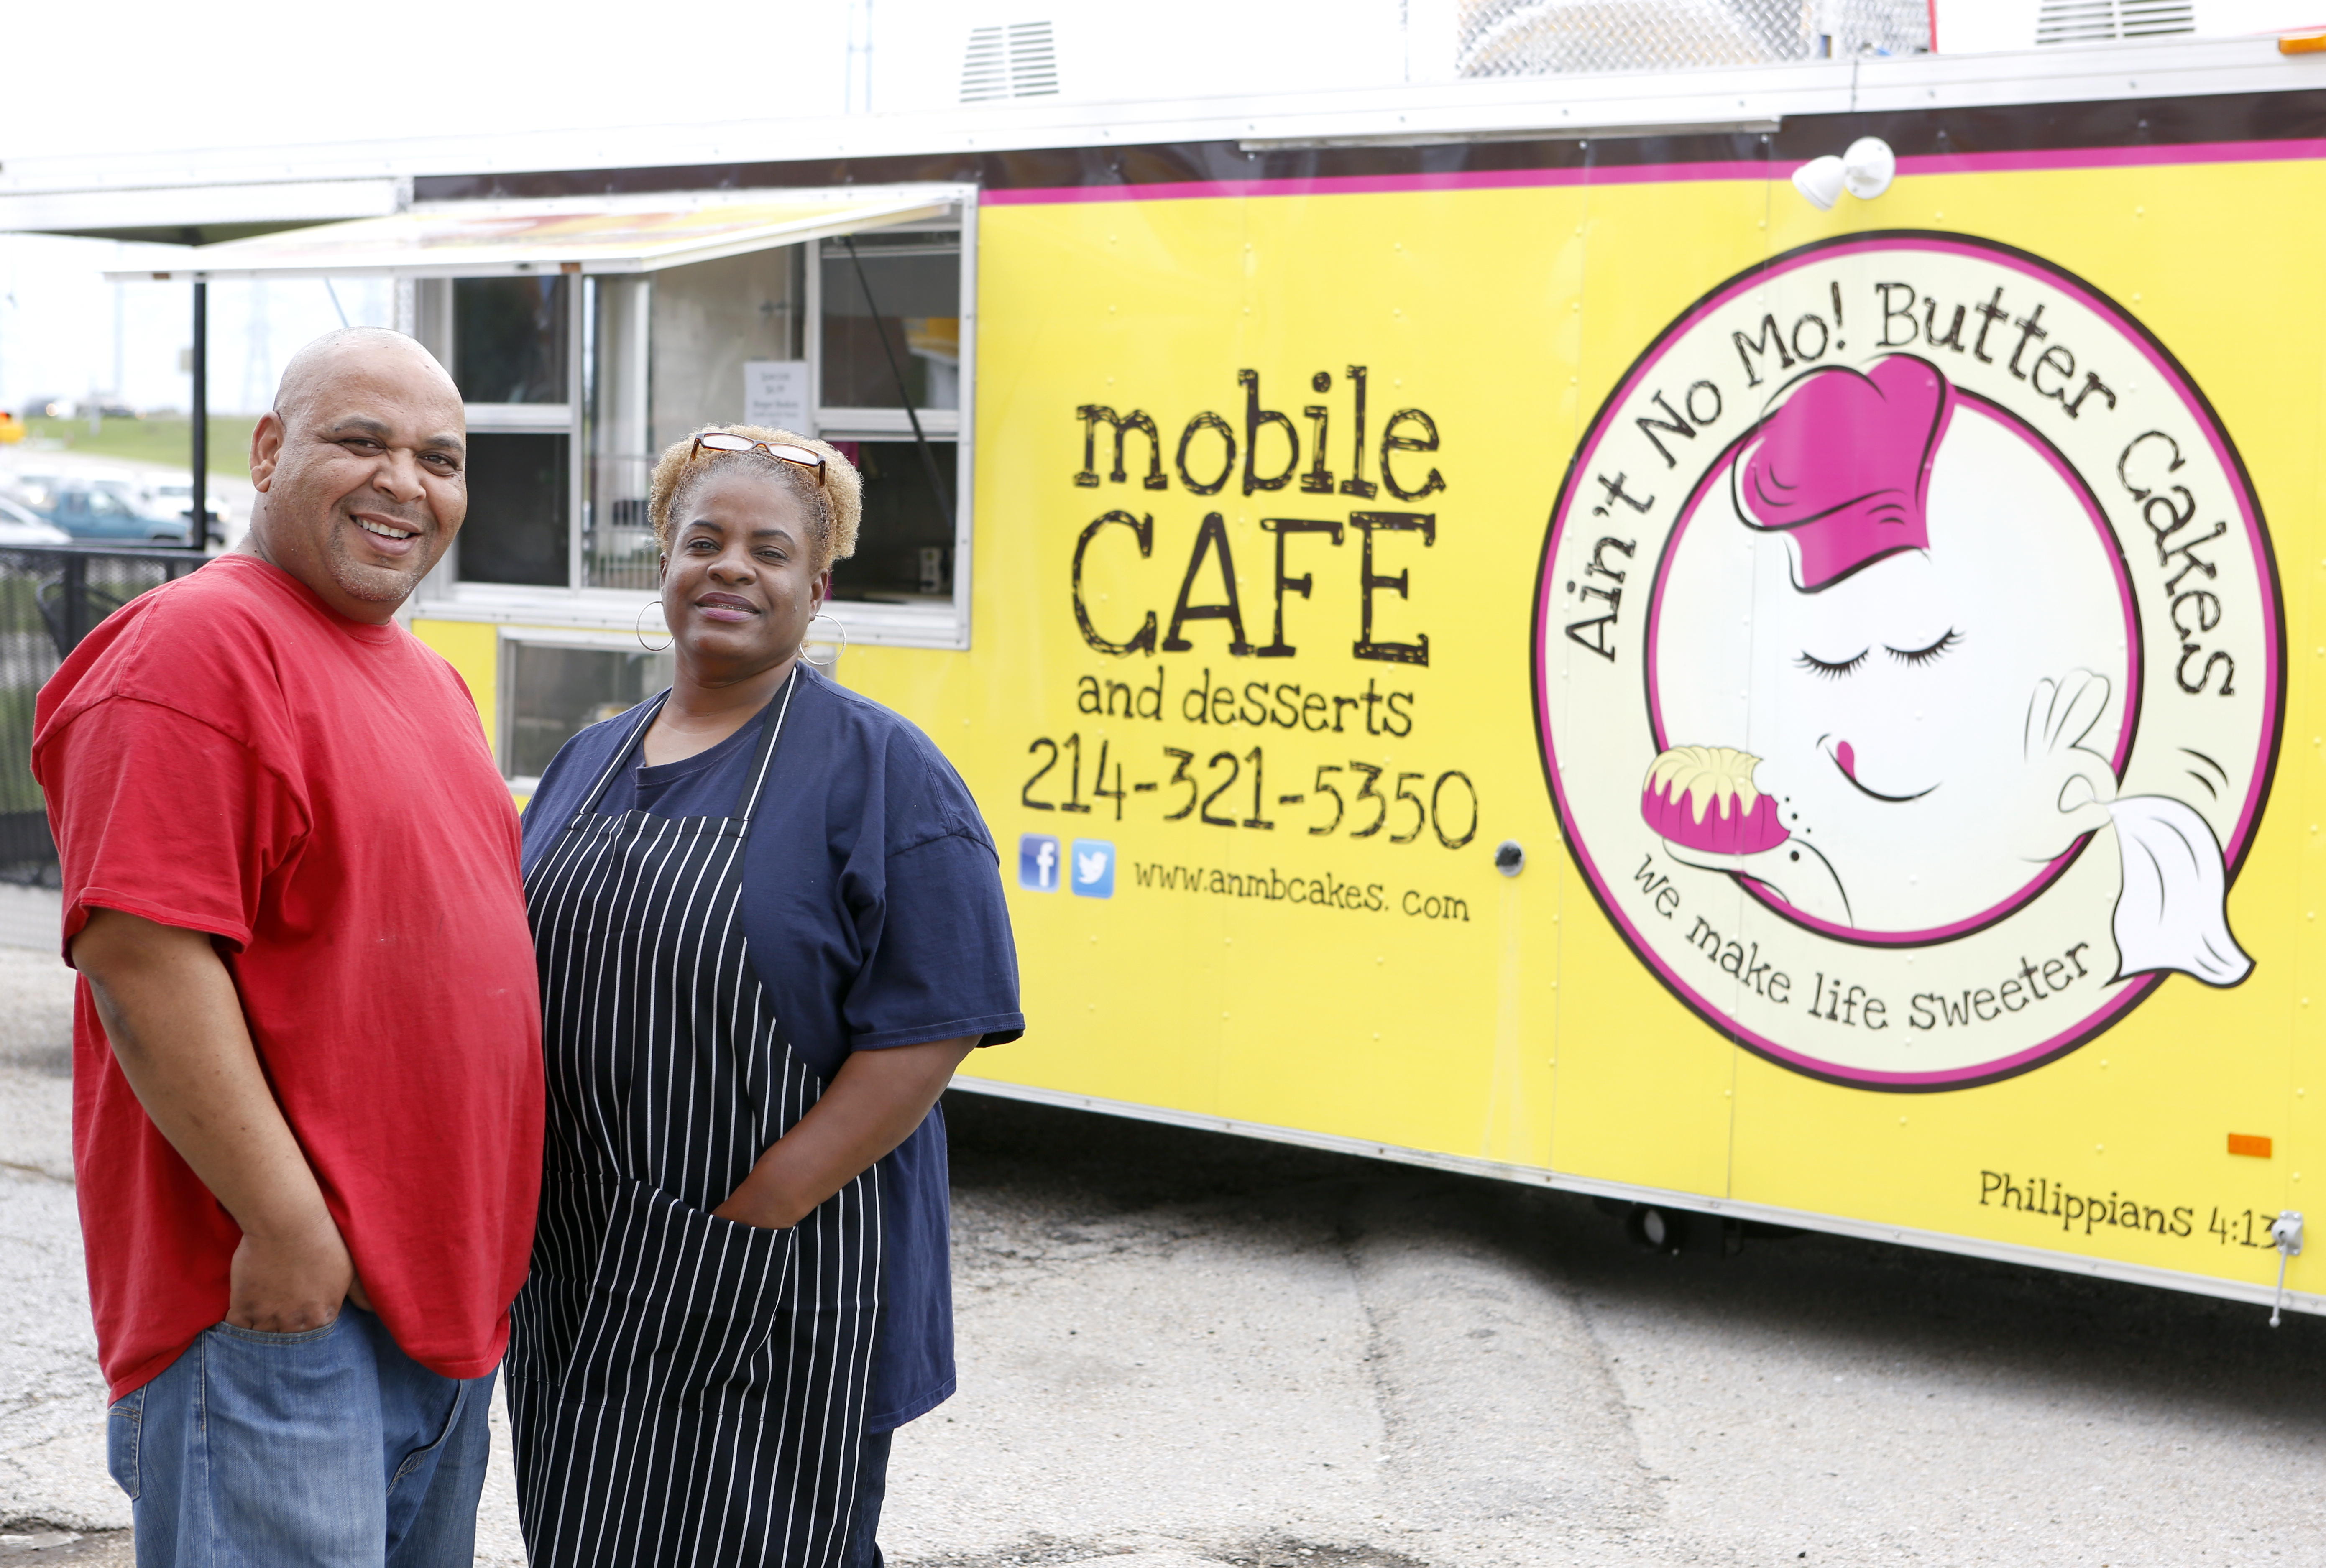 Quincy and Sheri Brown outside their food truck, Ain't No Mo! Butter Cakes, on their third day operating from a Shell gas station near 635 and Ferguson Rd in Garland, Texas. Photographed on Friday, November 6, 2015. Photo/Lara Solt